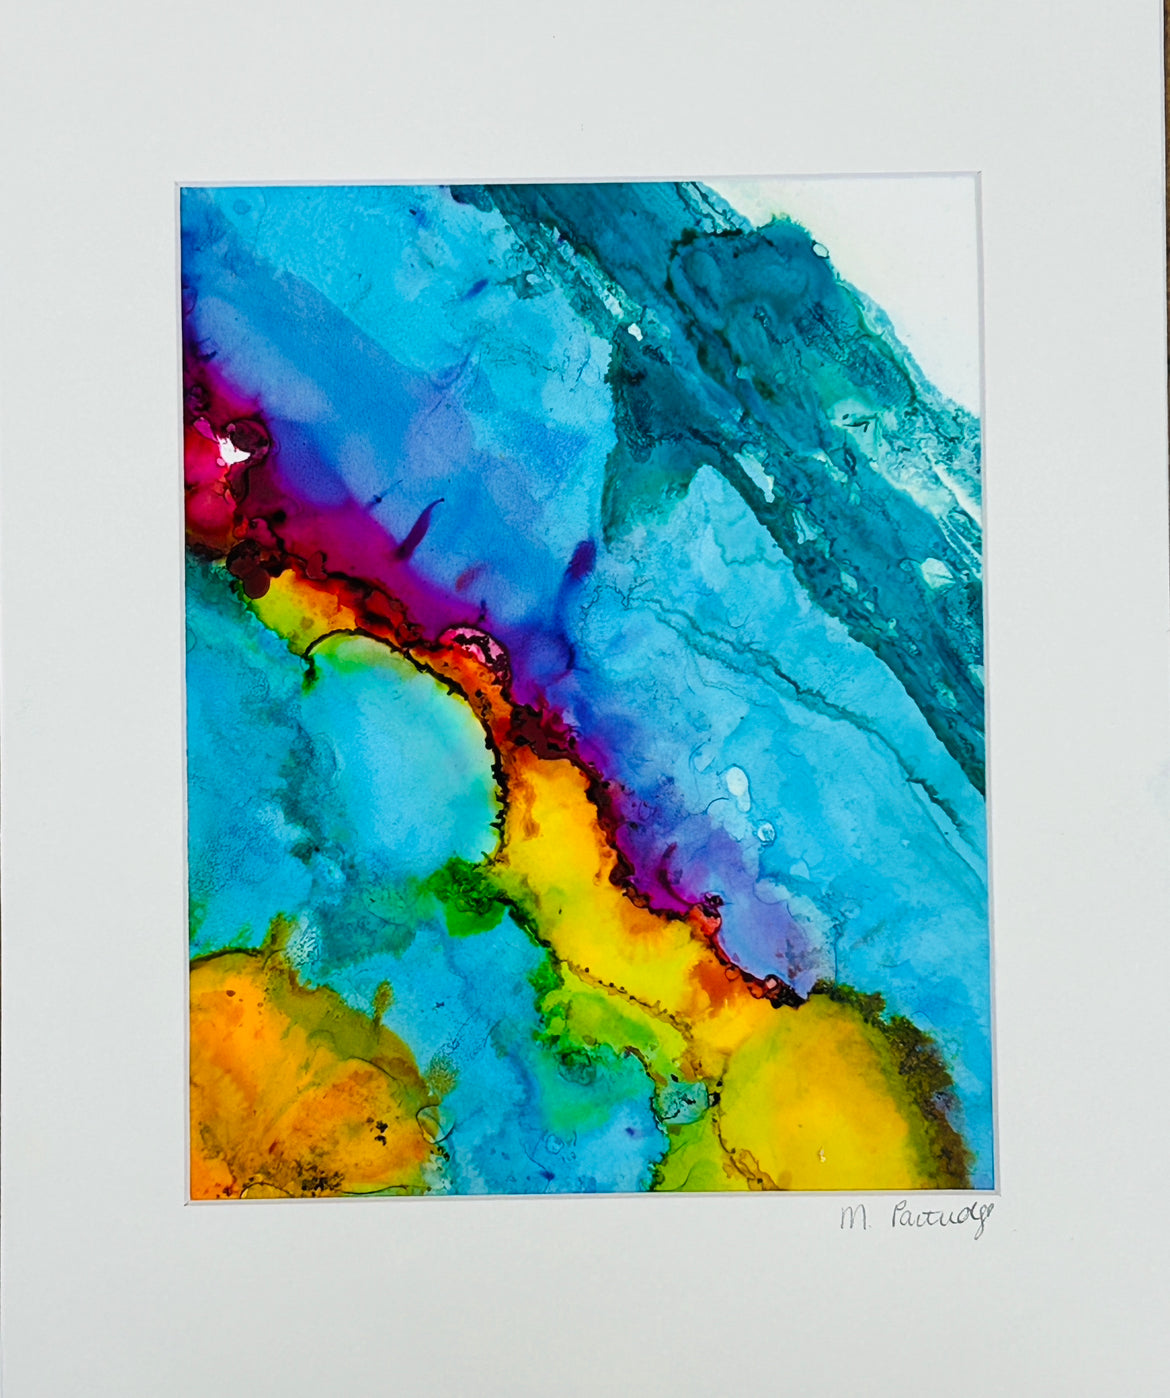 Color me in Rainbows #1 9”x12” Original Alcohol Ink on Yupo Paper